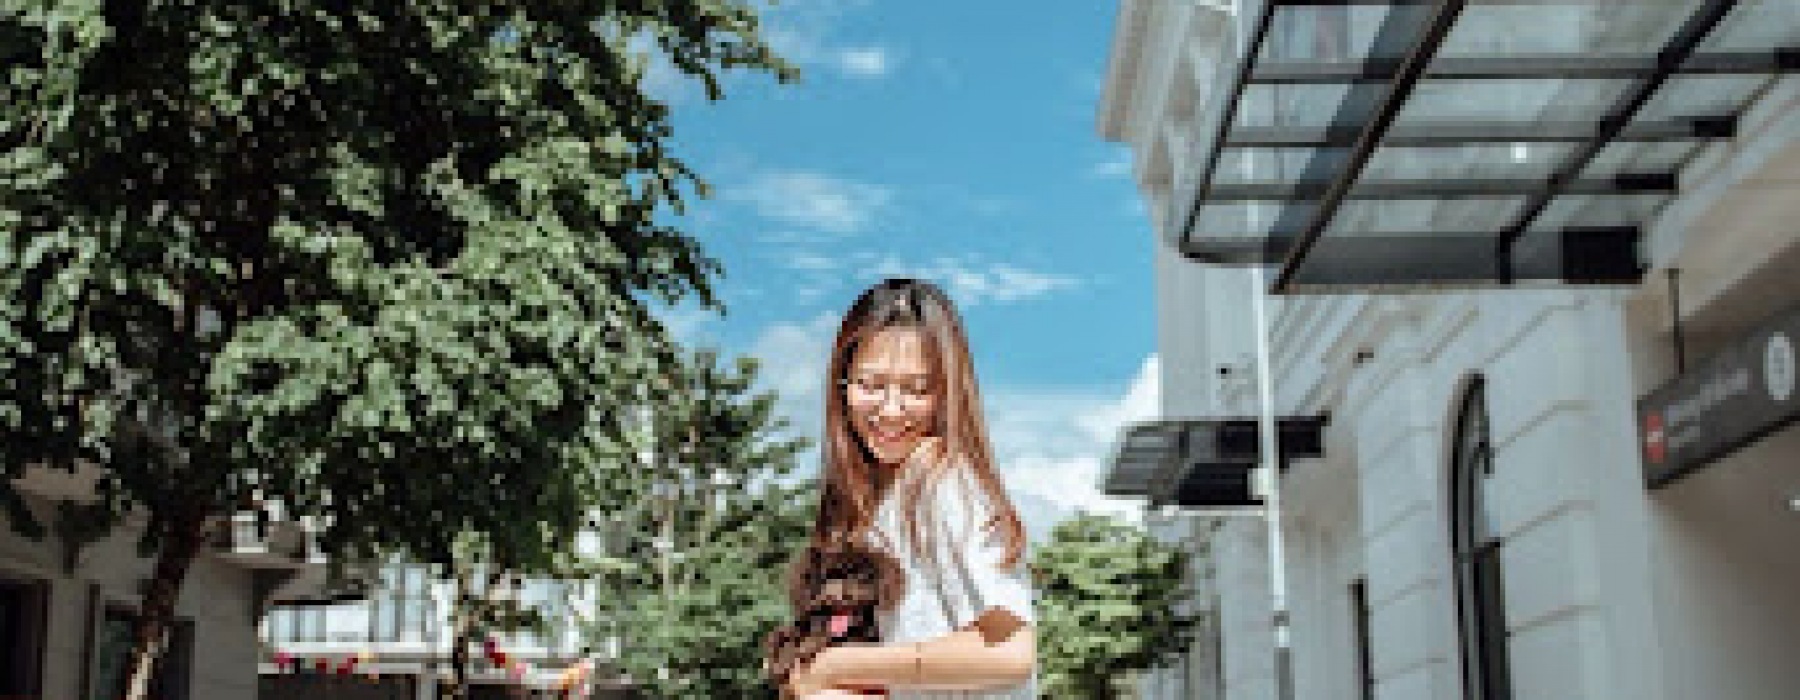 Girl holding small cute dog outside of apartment building